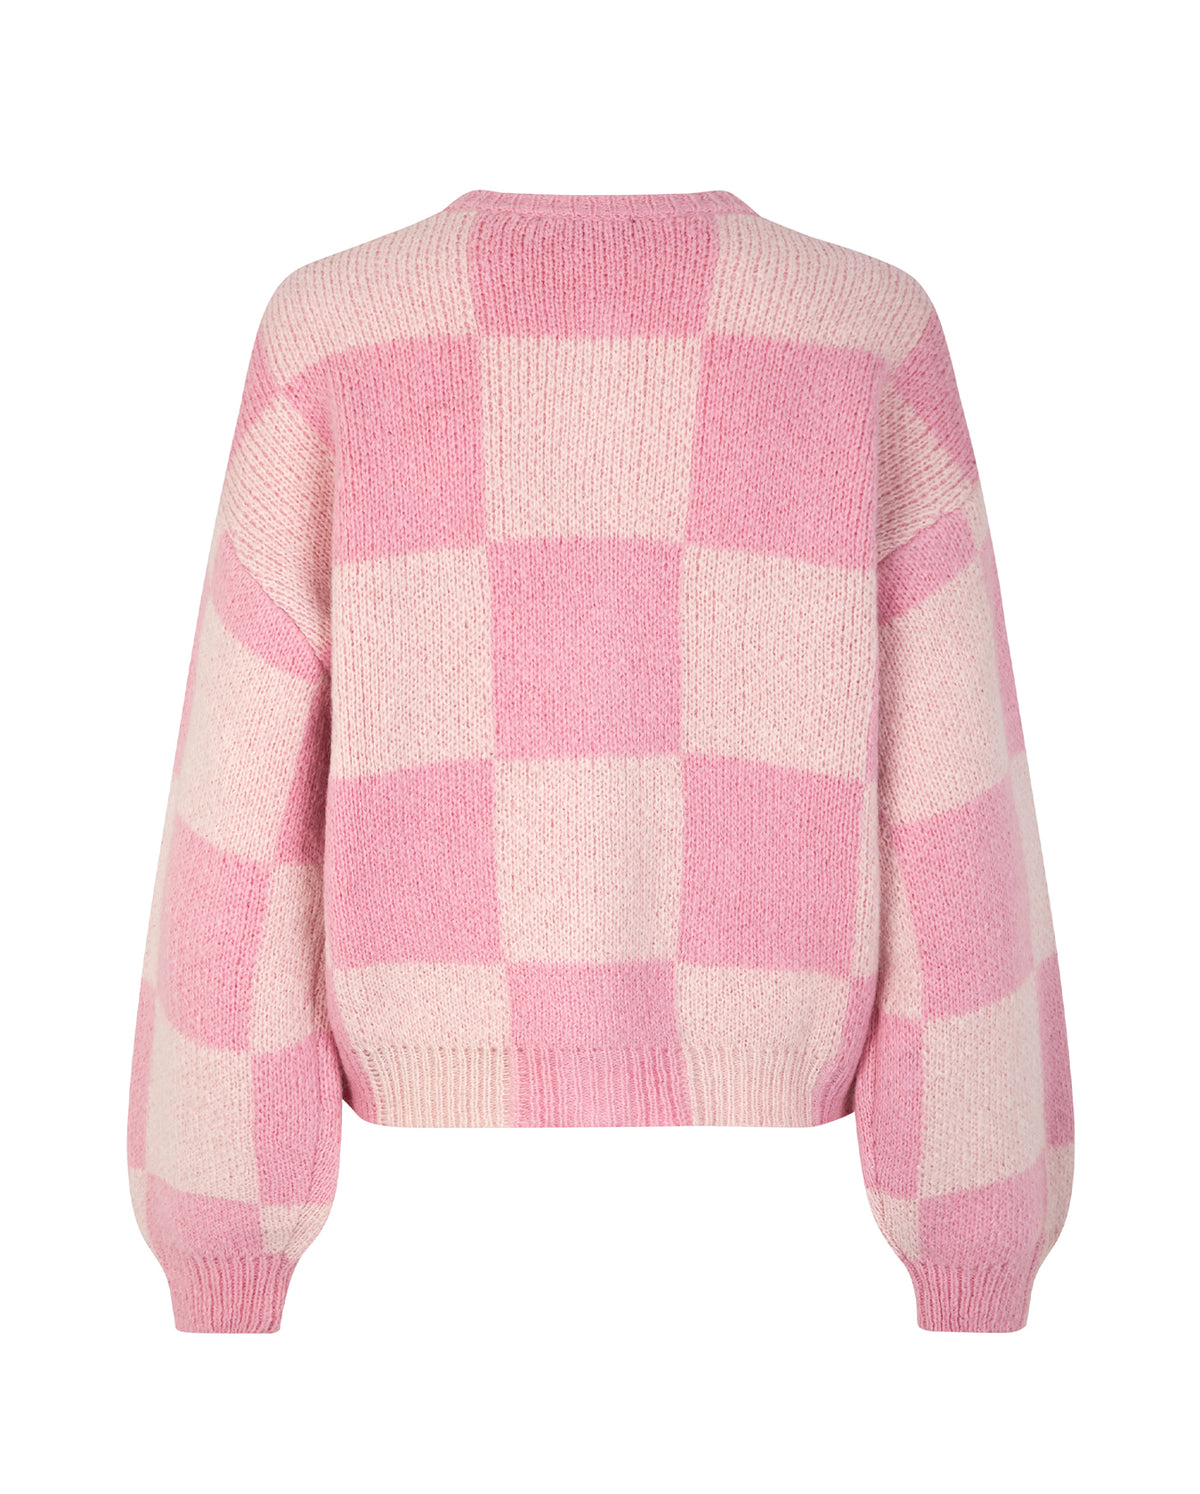 Adonis Sweater - Orchid Check